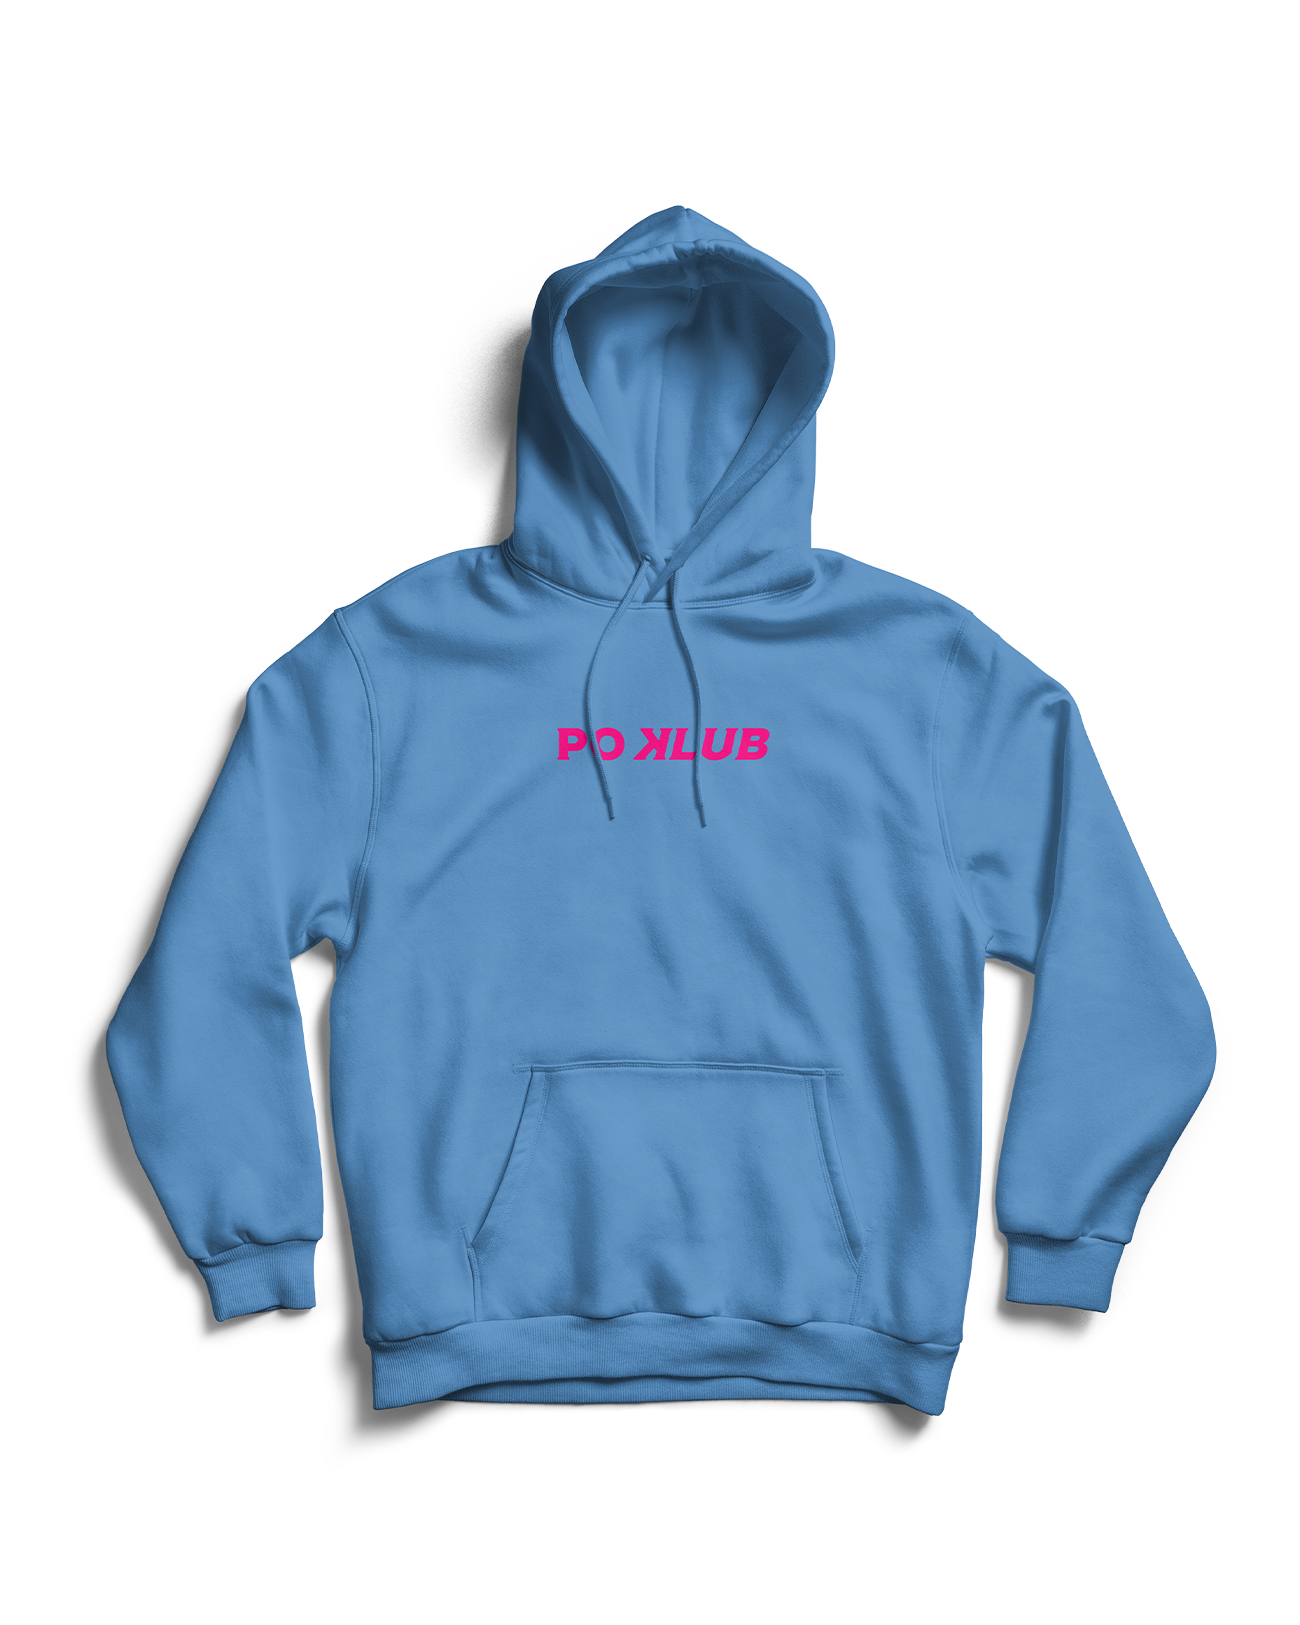 YOUTH Cotton Candy PO Club Hoodie